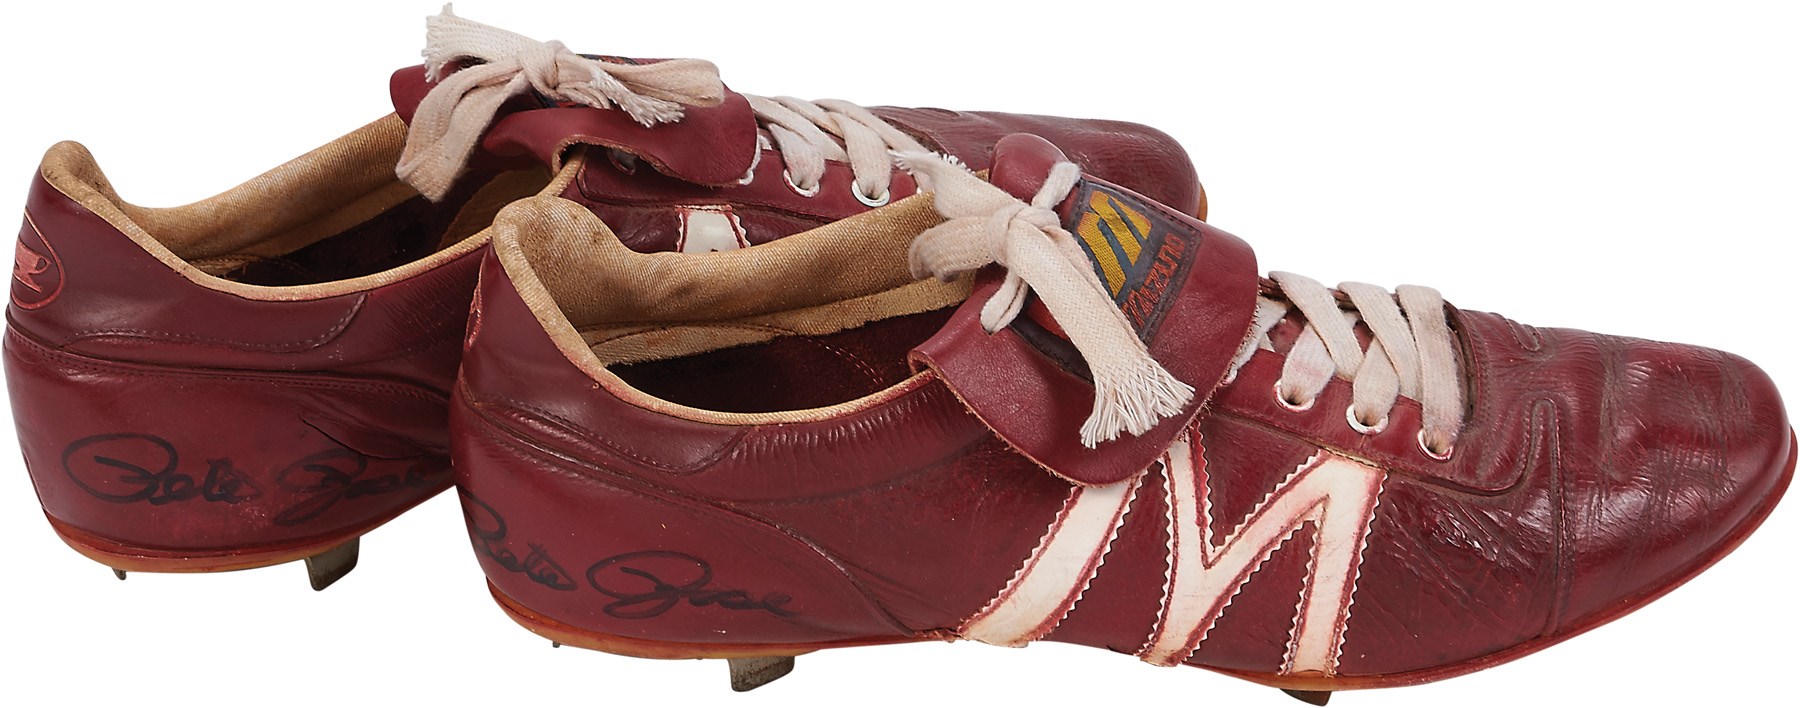 - 1980s Pete Rose Game Worn Spikes